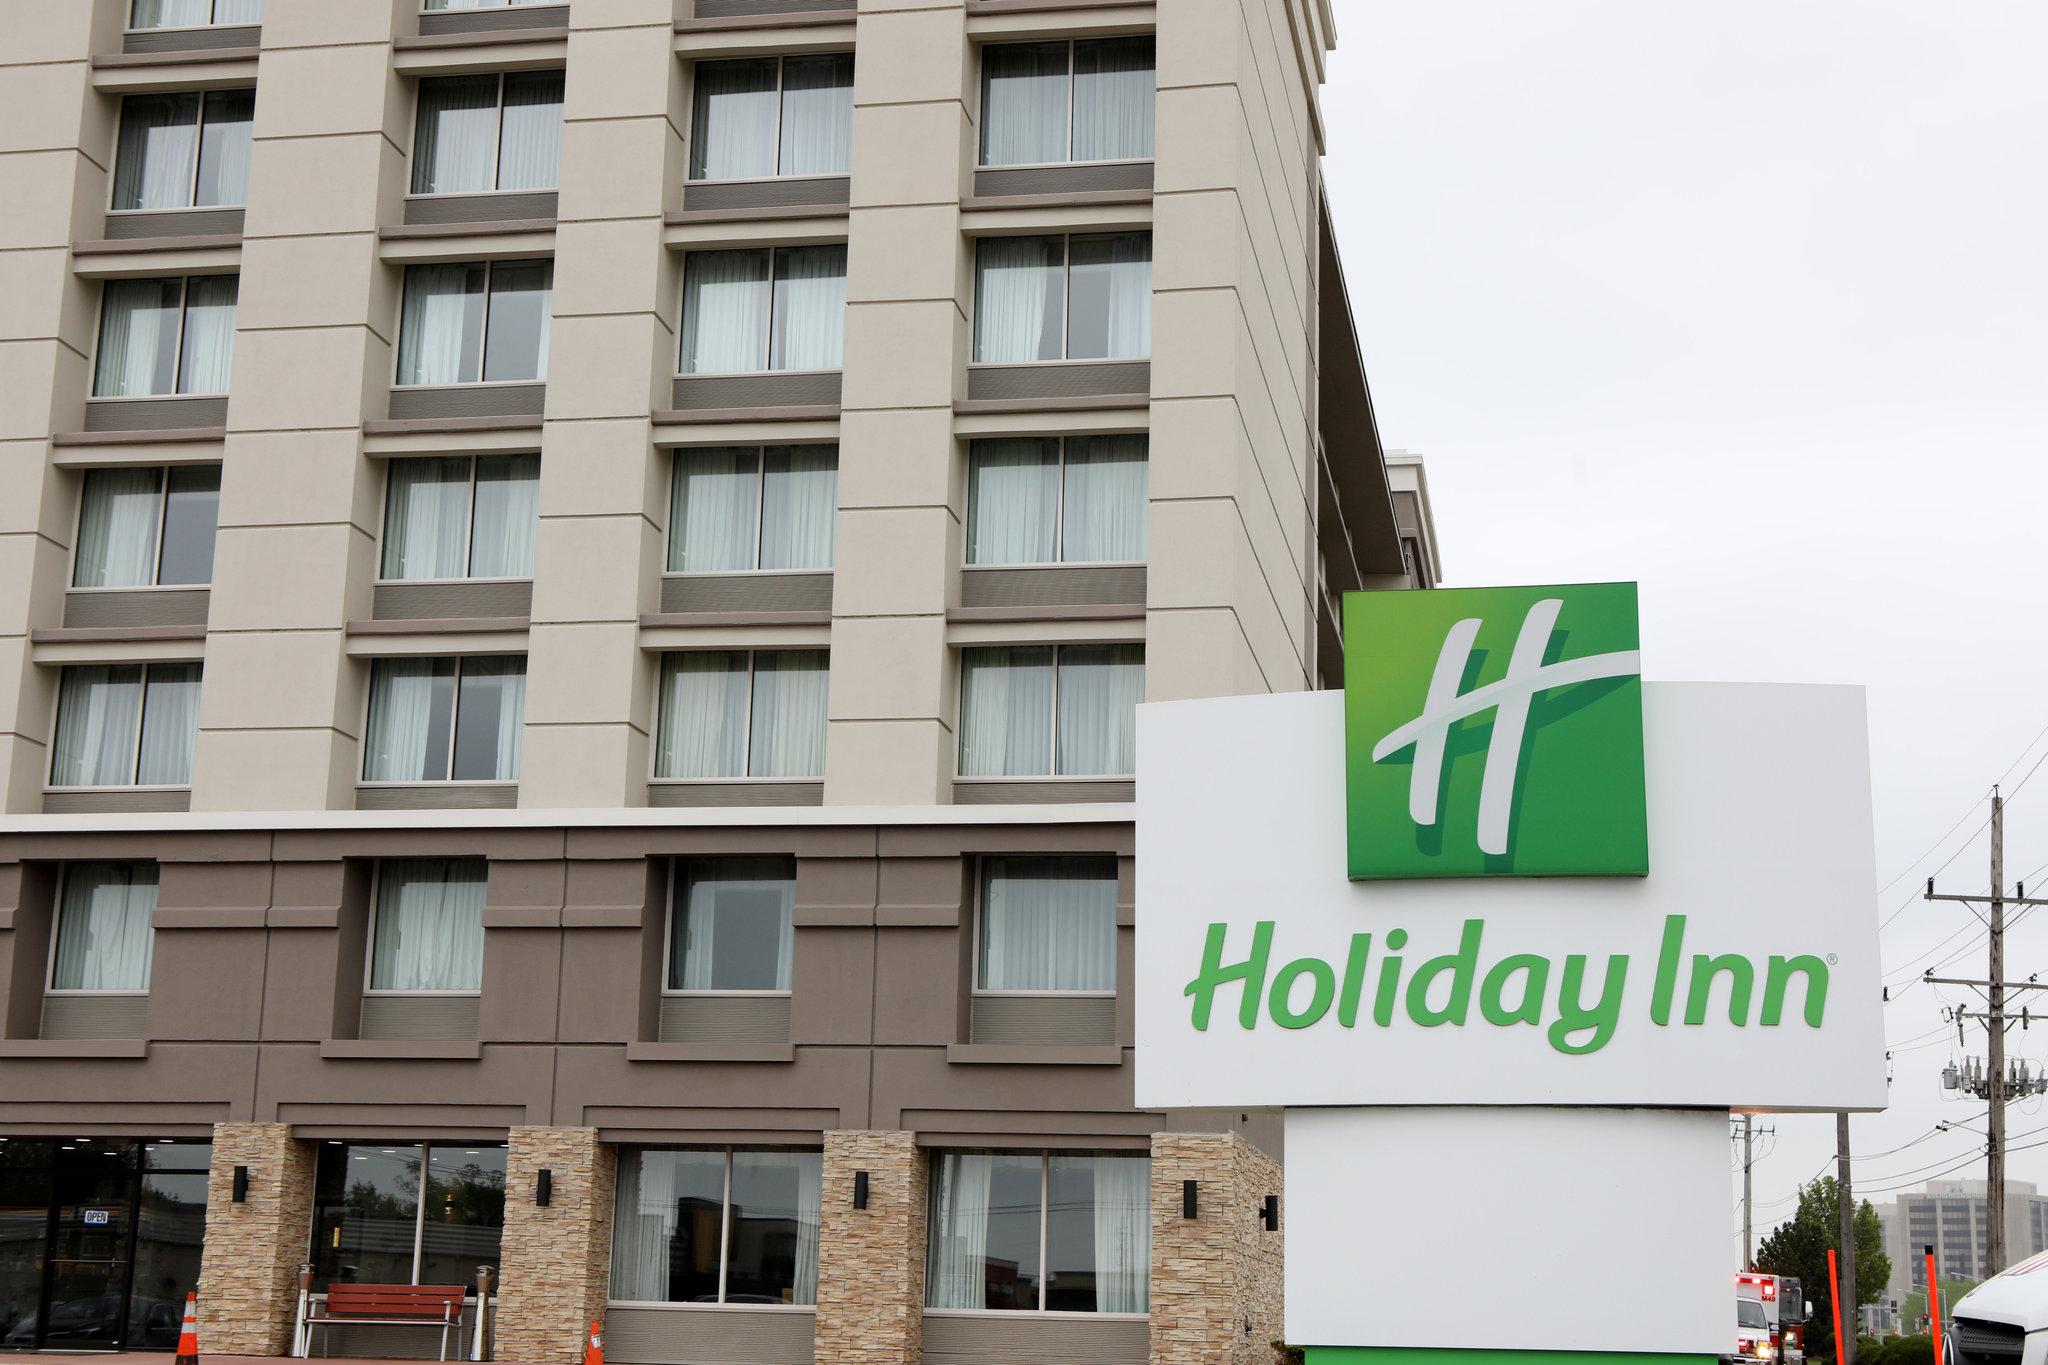 Holiday Inn Chicago Oakbrook in Oakbrook Terrace, IL